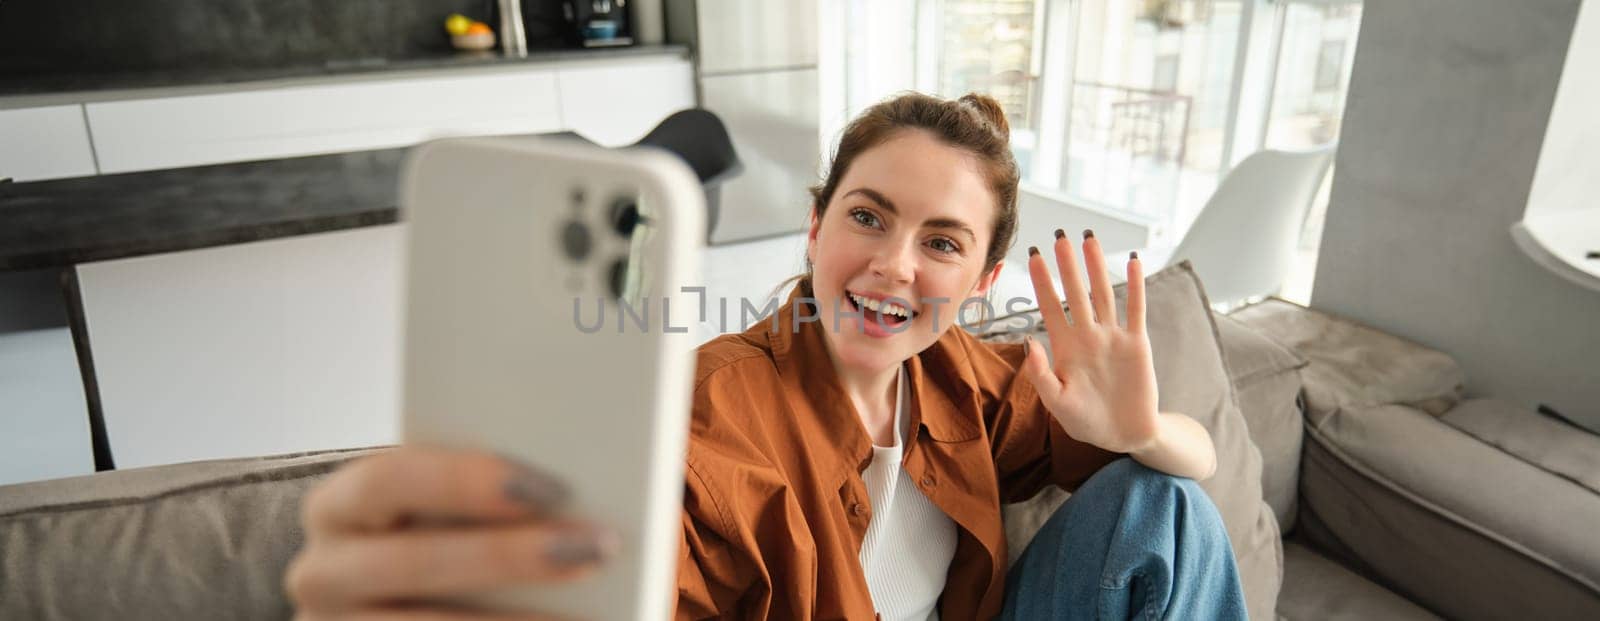 Friendly smiling young woman, sitting on couch and waving hand at smartphone camera, video chats, talking on mobile phone, connects to online conversation on application.